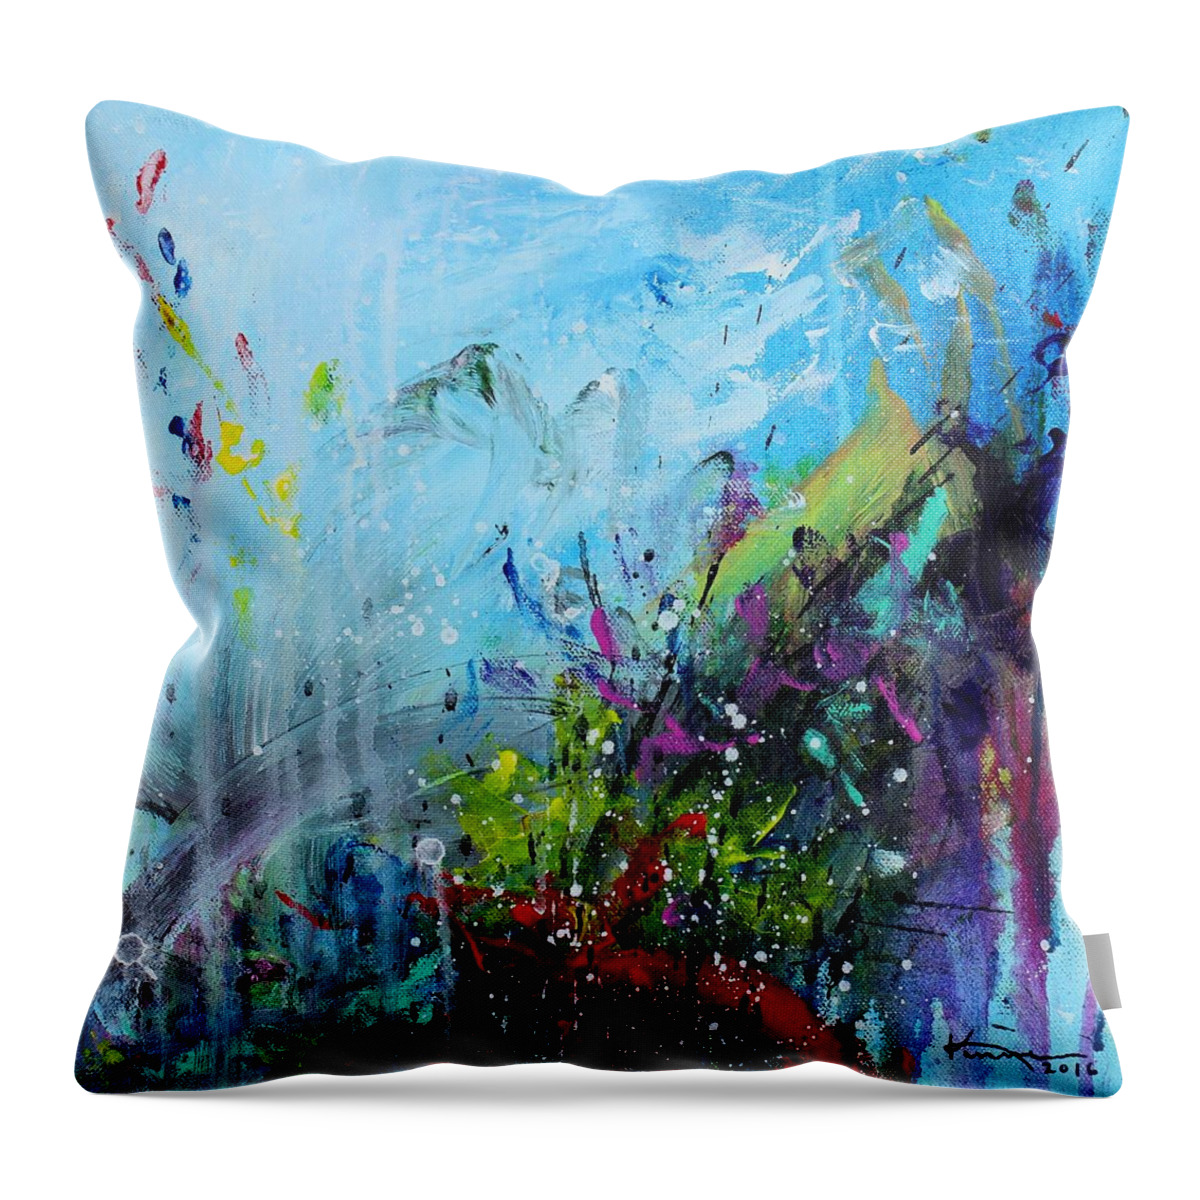 Coral Reef Throw Pillow featuring the painting Coral Reef by Kume Bryant